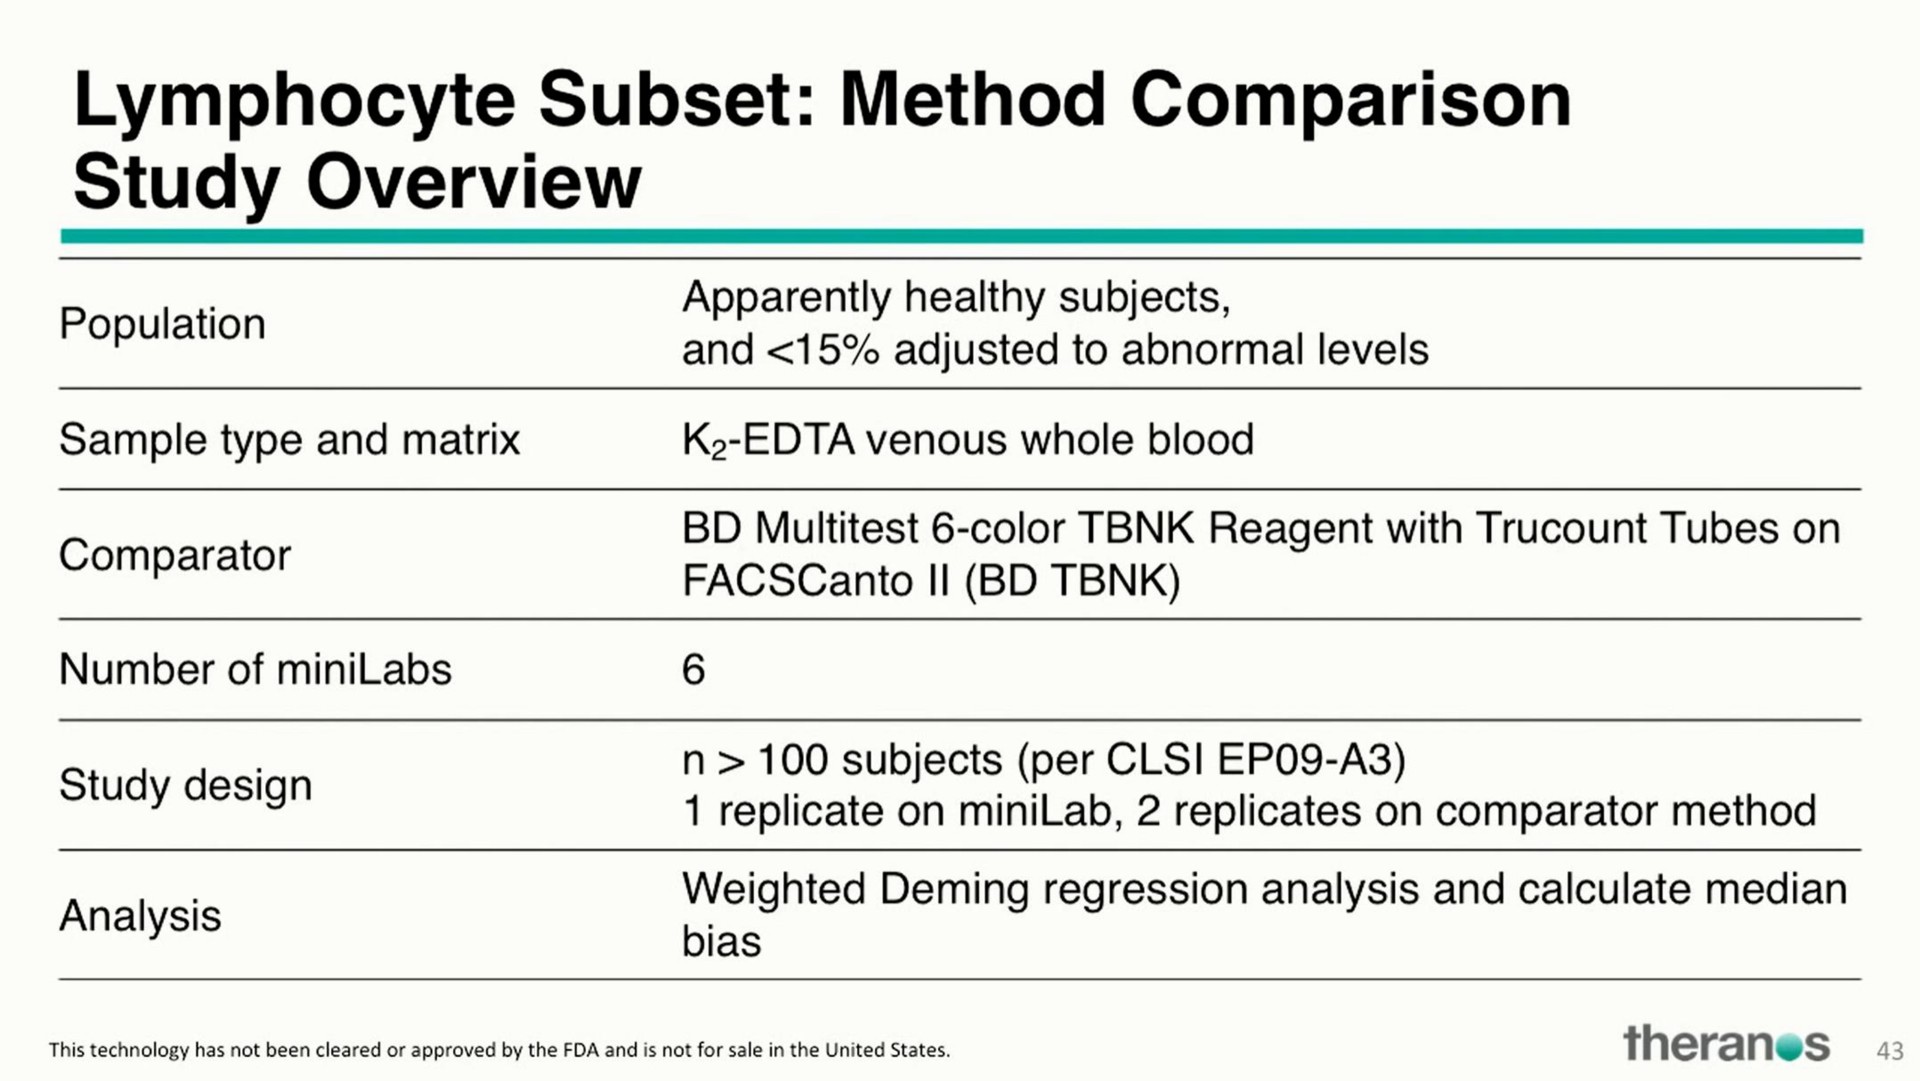 lymphocyte subset method comparison study overview | Theranos